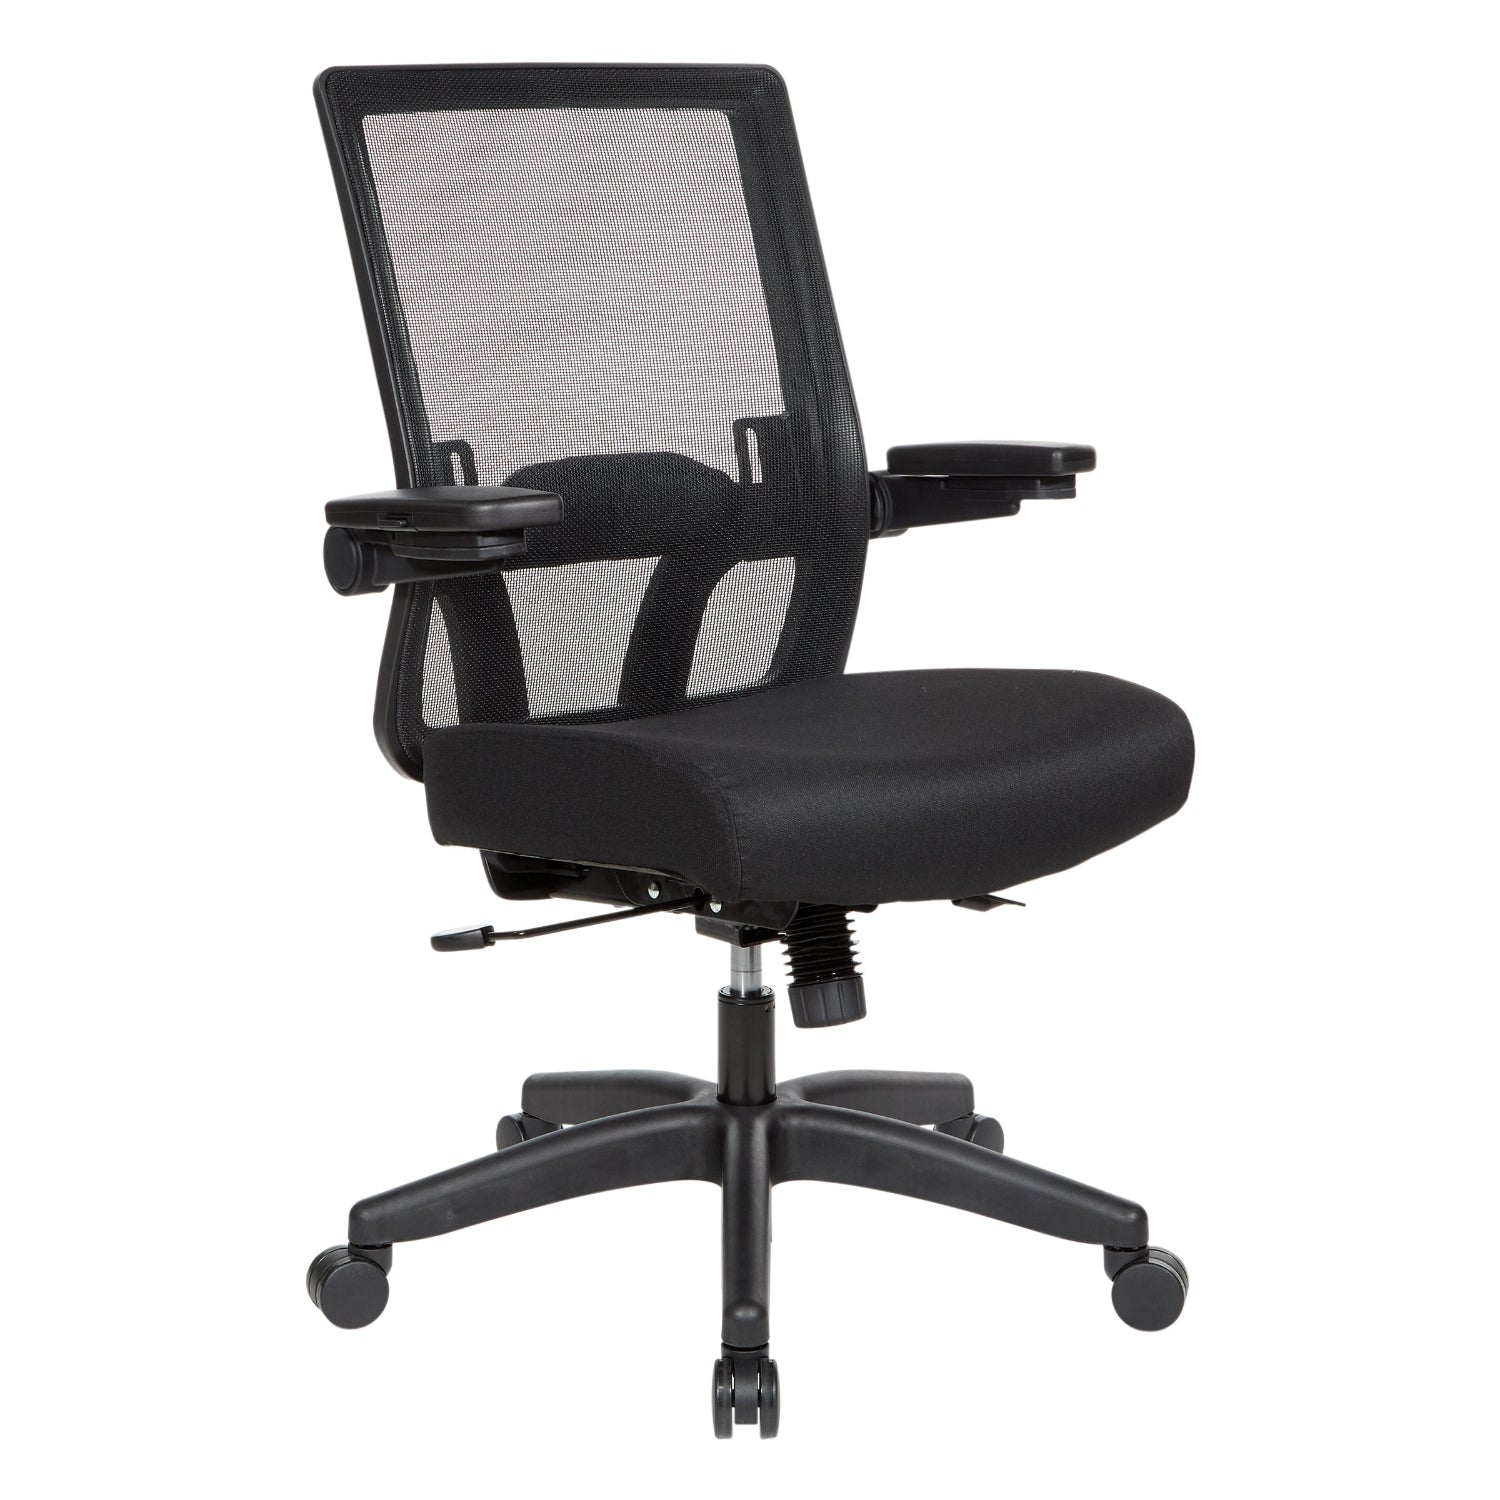 Breathable Mesh Back Manager's Chair with 4" Thick Padded Seat, Height Adjustable Lumbar Support, 3-Way Padded Cantilever Adjustable Flip Arms, Seat Slider and Black Nylon Base